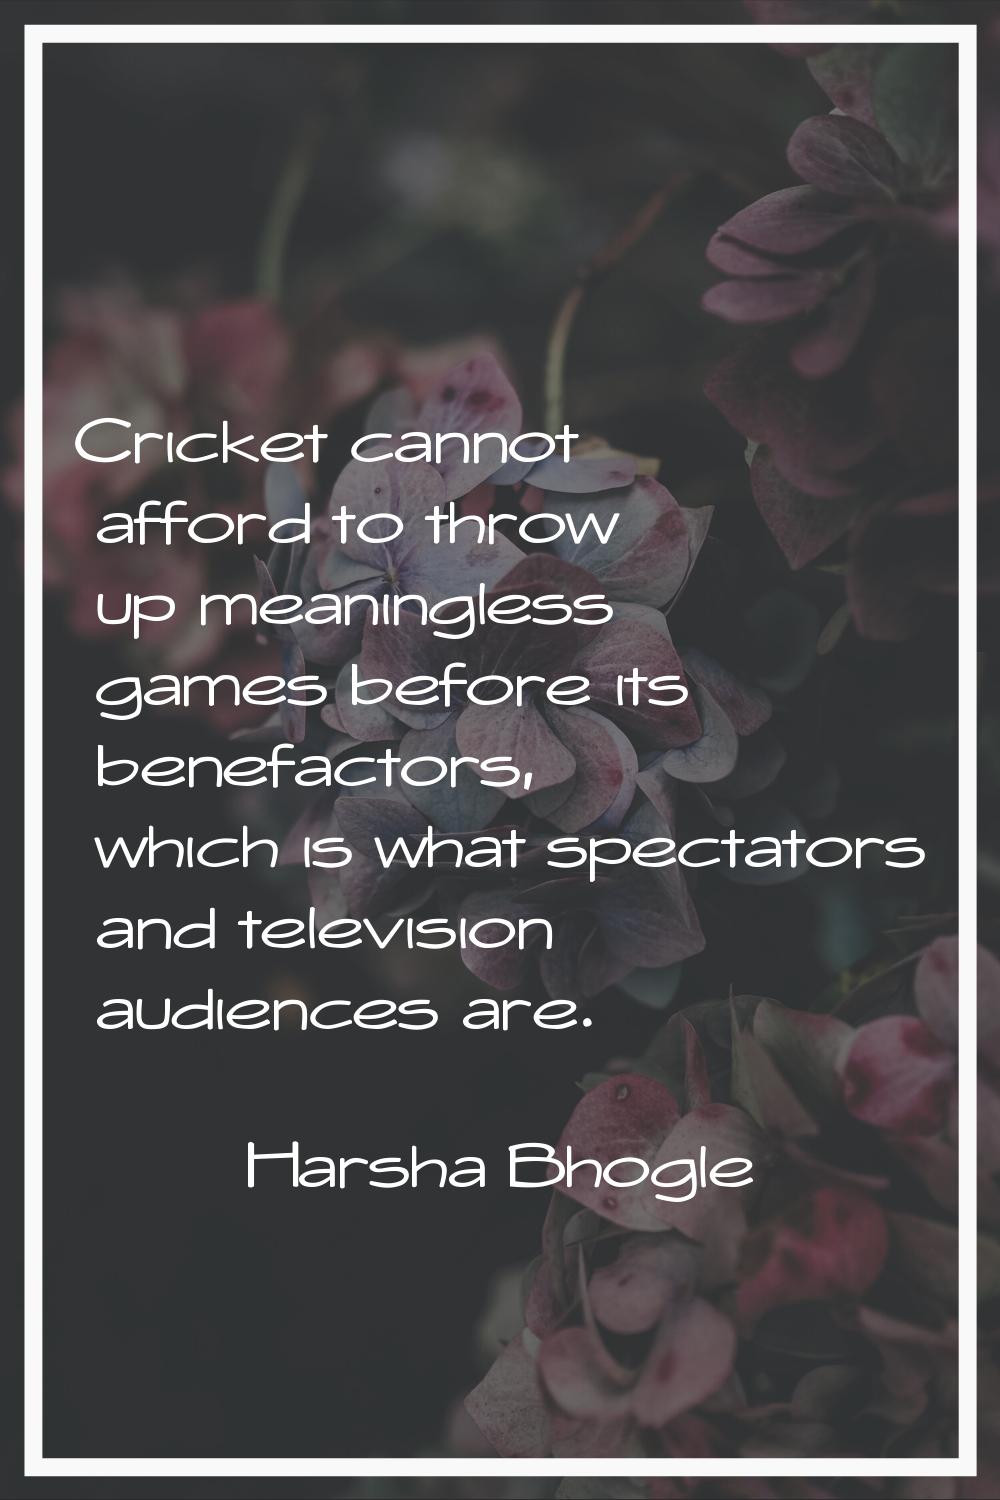 Cricket cannot afford to throw up meaningless games before its benefactors, which is what spectator